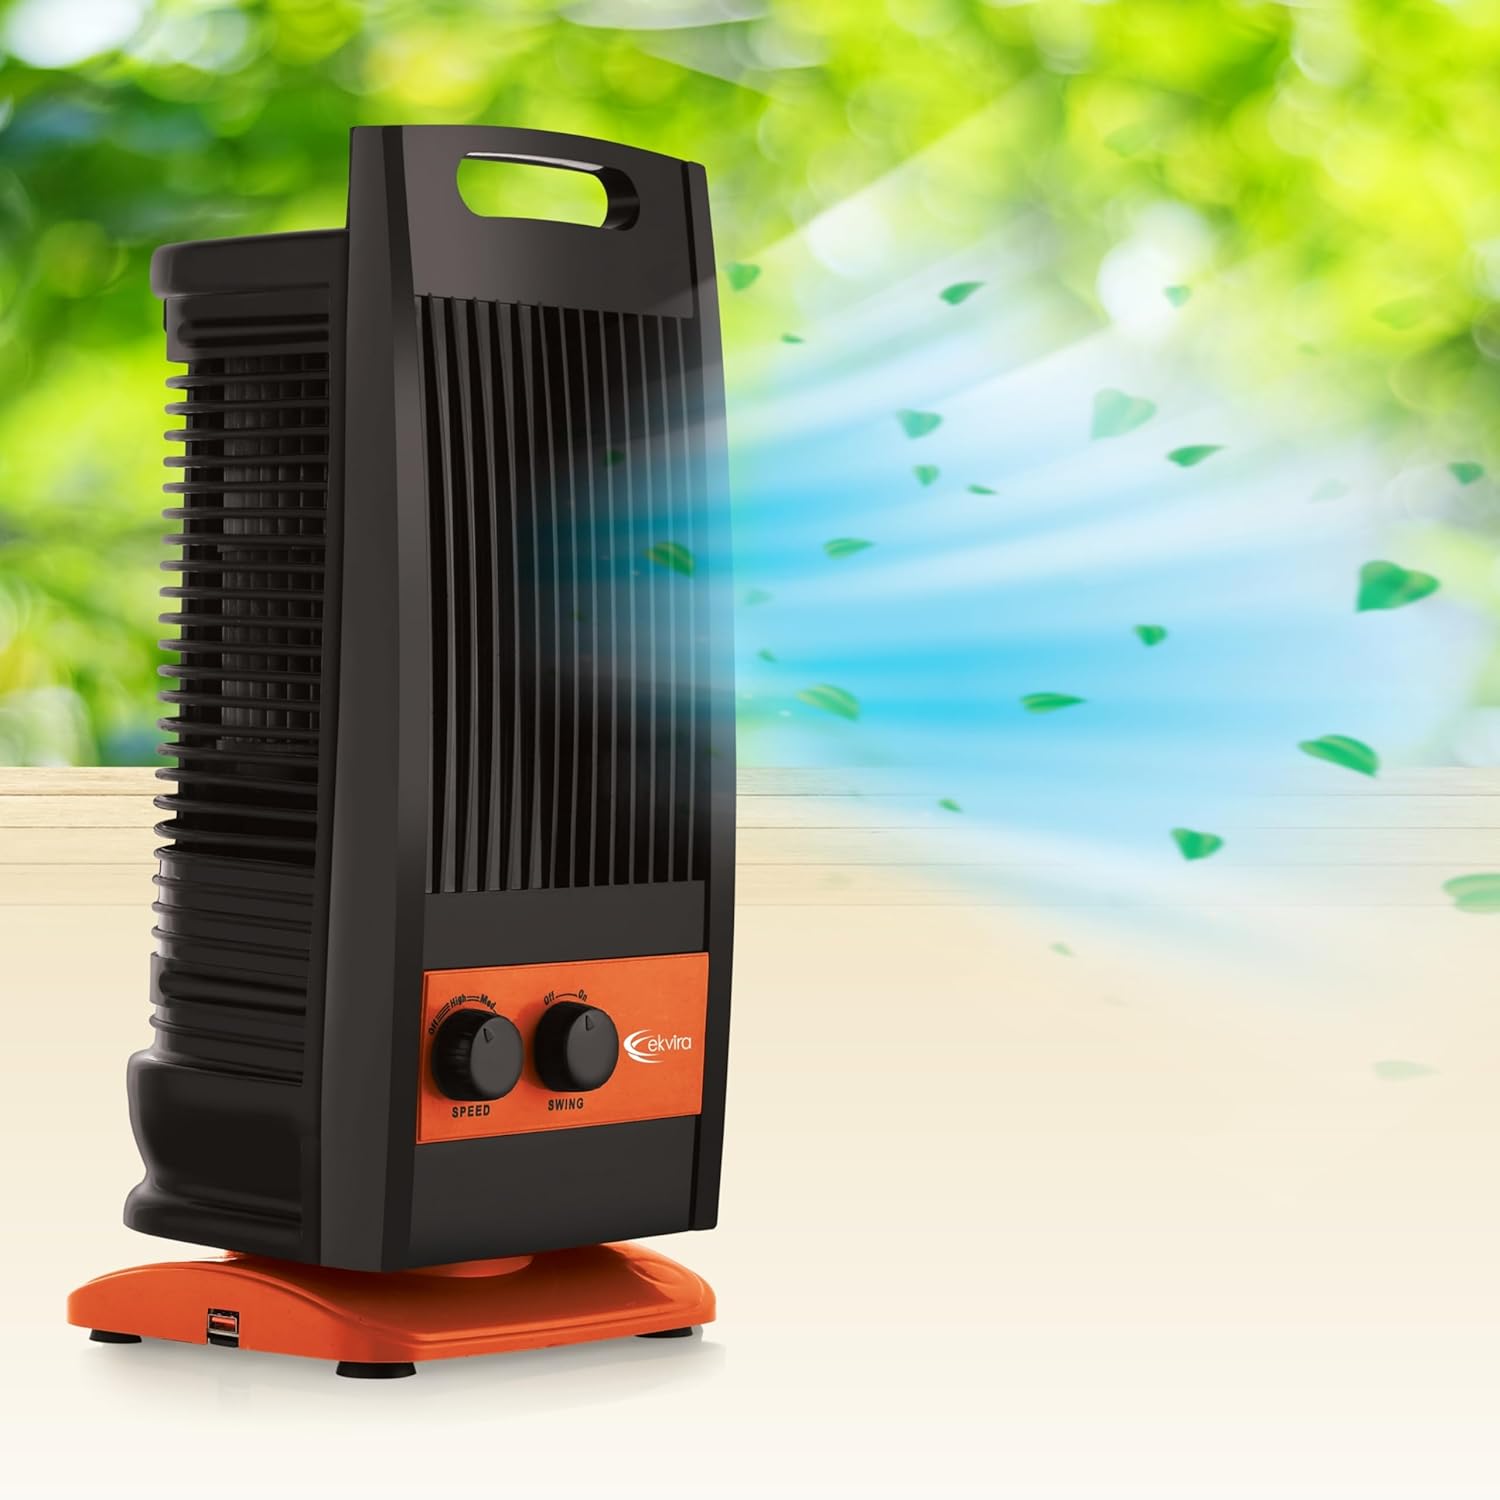 Ekvira Portable Cooler Fan NEW: Boosted Air Flow| 120° Wide Oscillation for Table, Kitchen, Home, Office